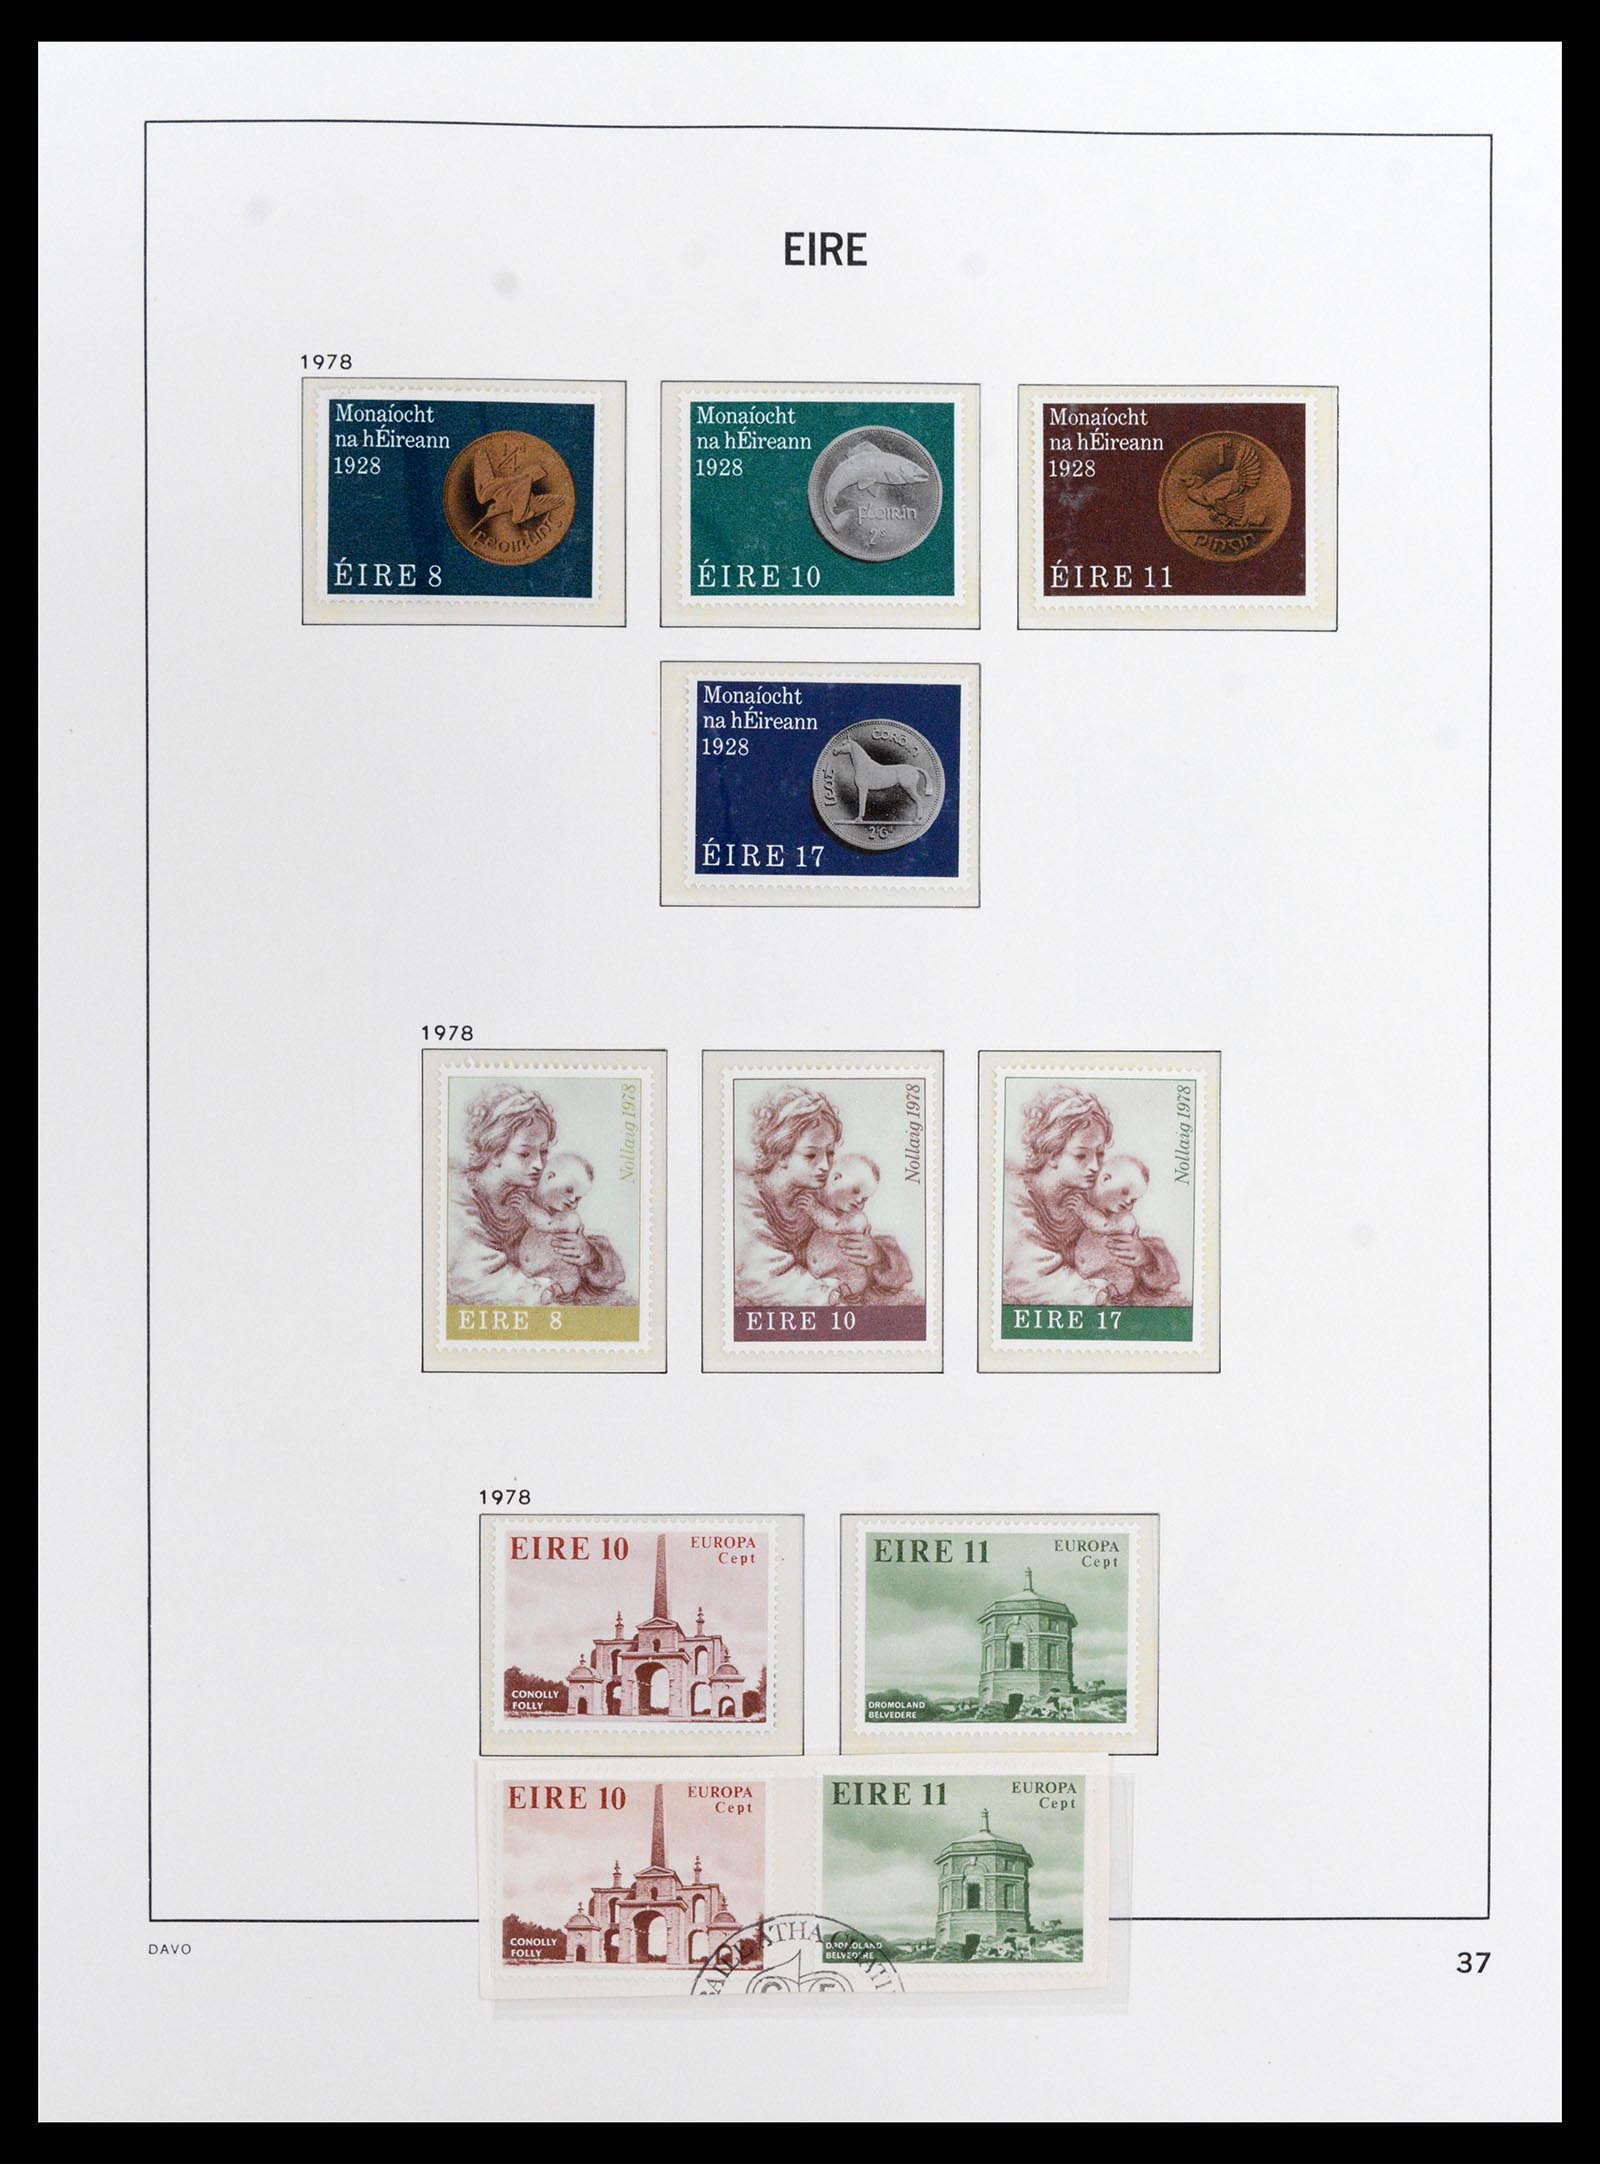 37789 037 - Stamp Collection 37789 Ireland 1922-1995.